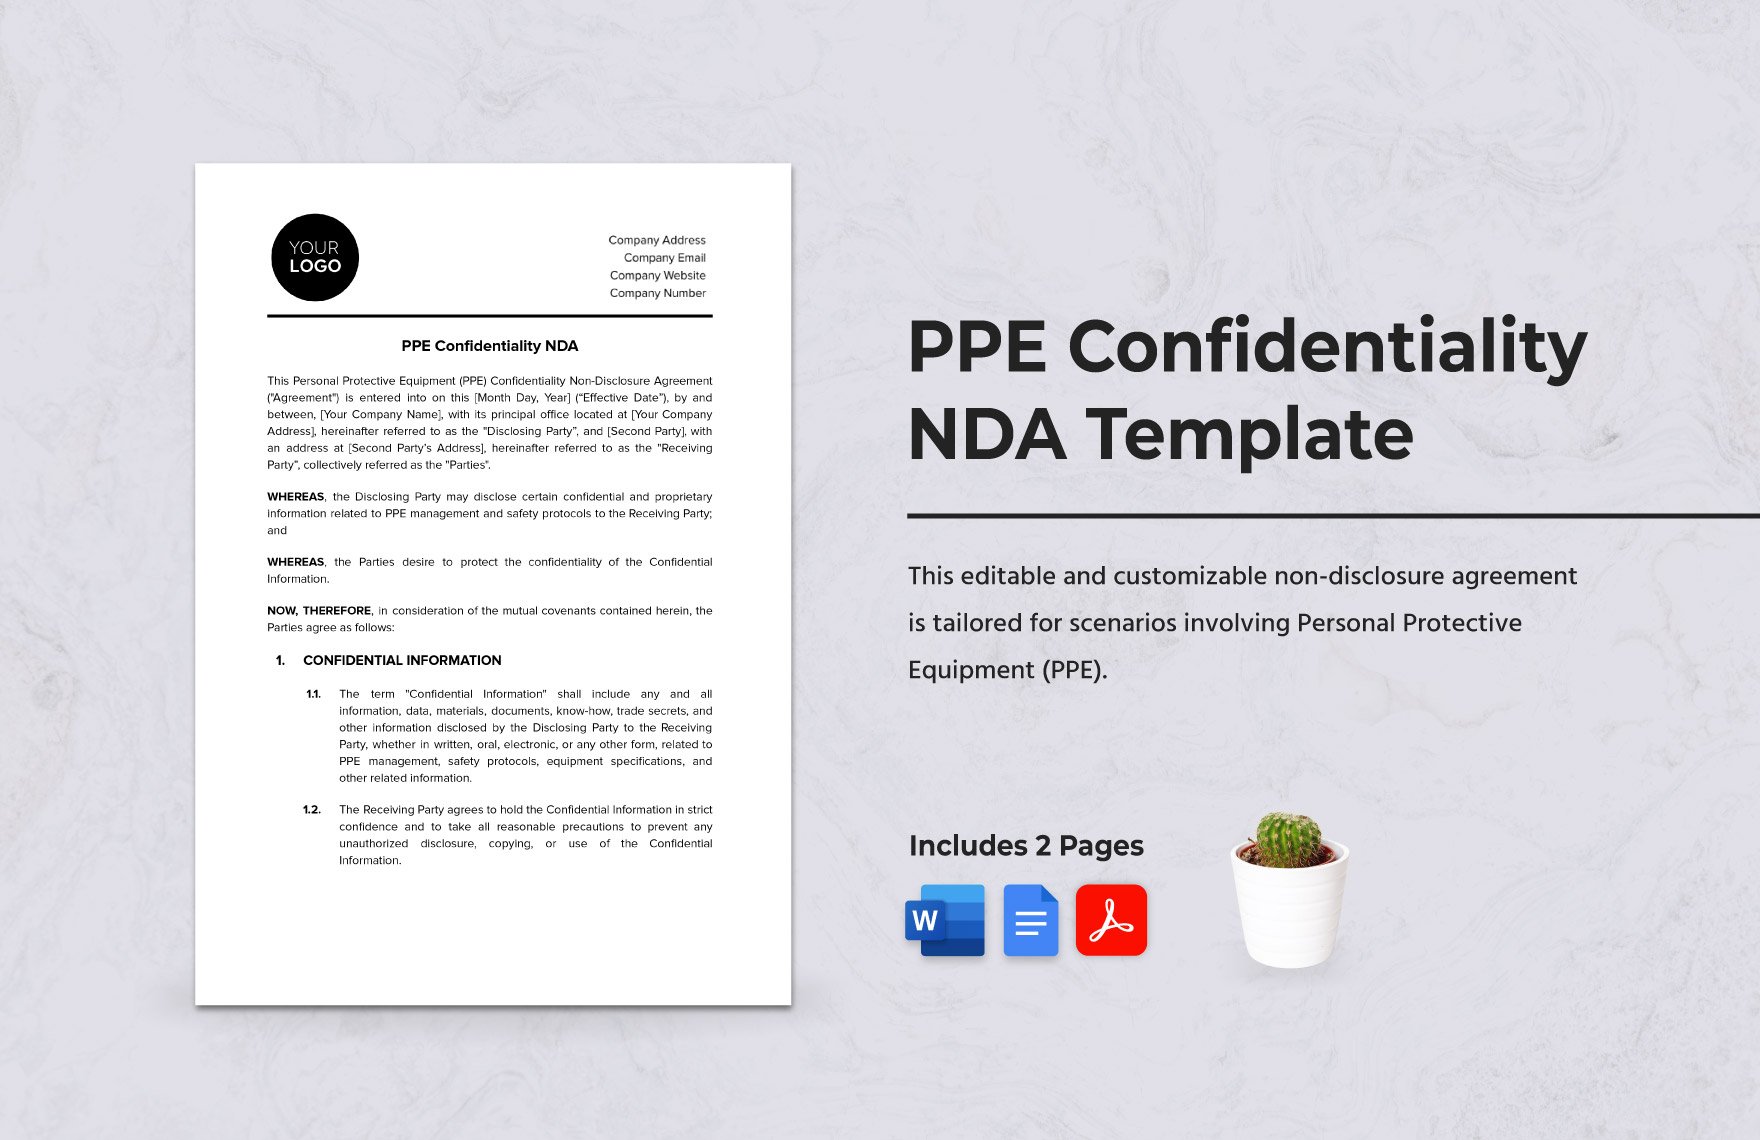 PPE Confidentiality NDA Template